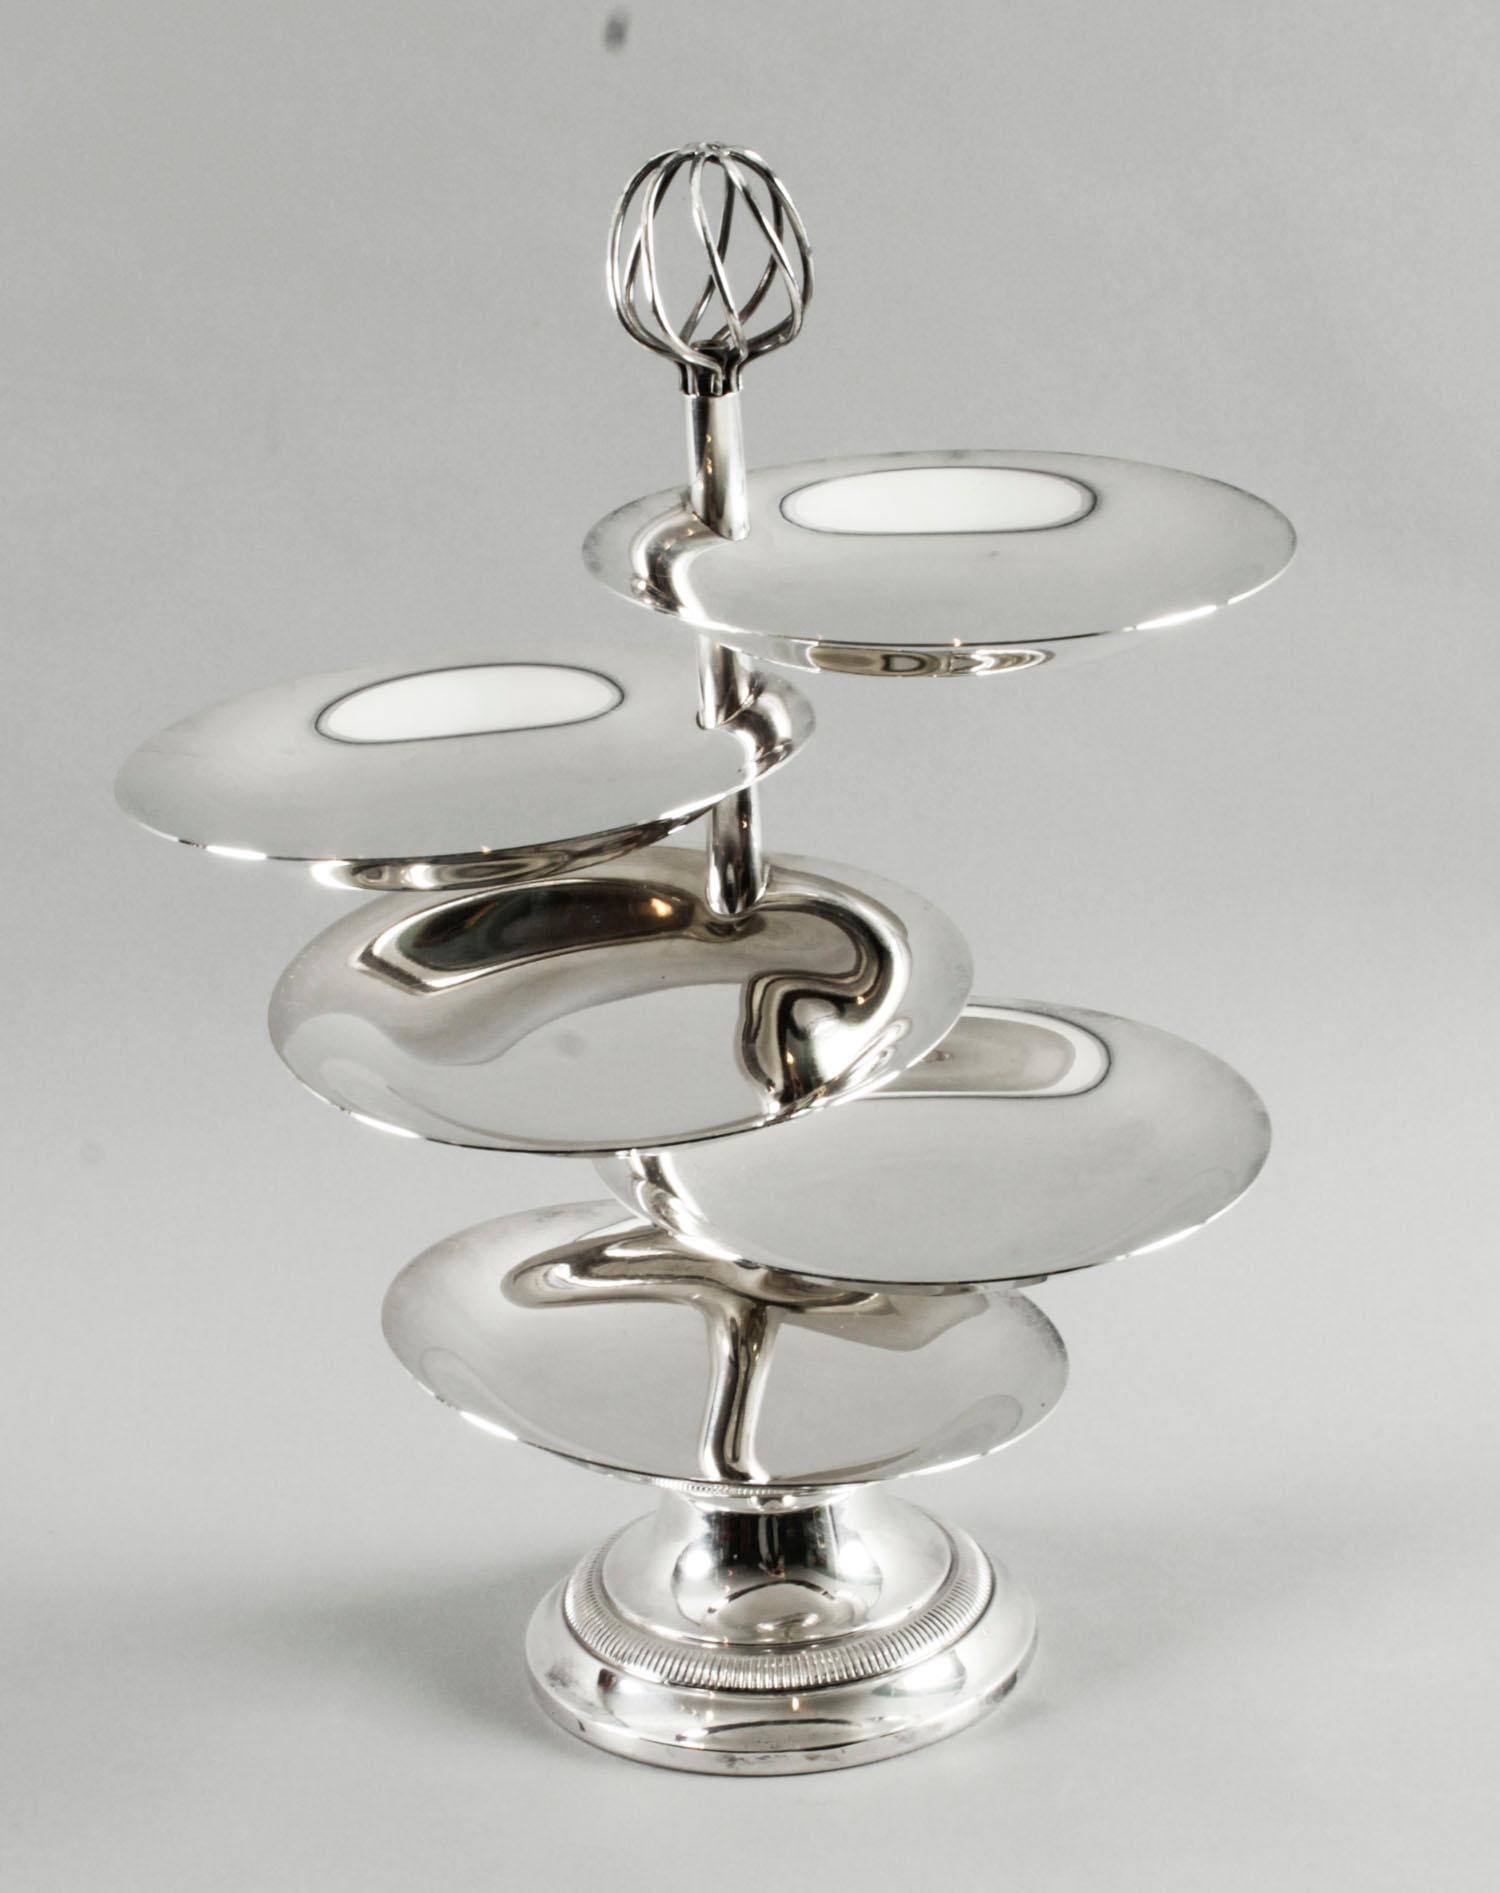 Français Antique Silver Plated Hors d'oeuvres Stand by Christofle 19th C. en vente